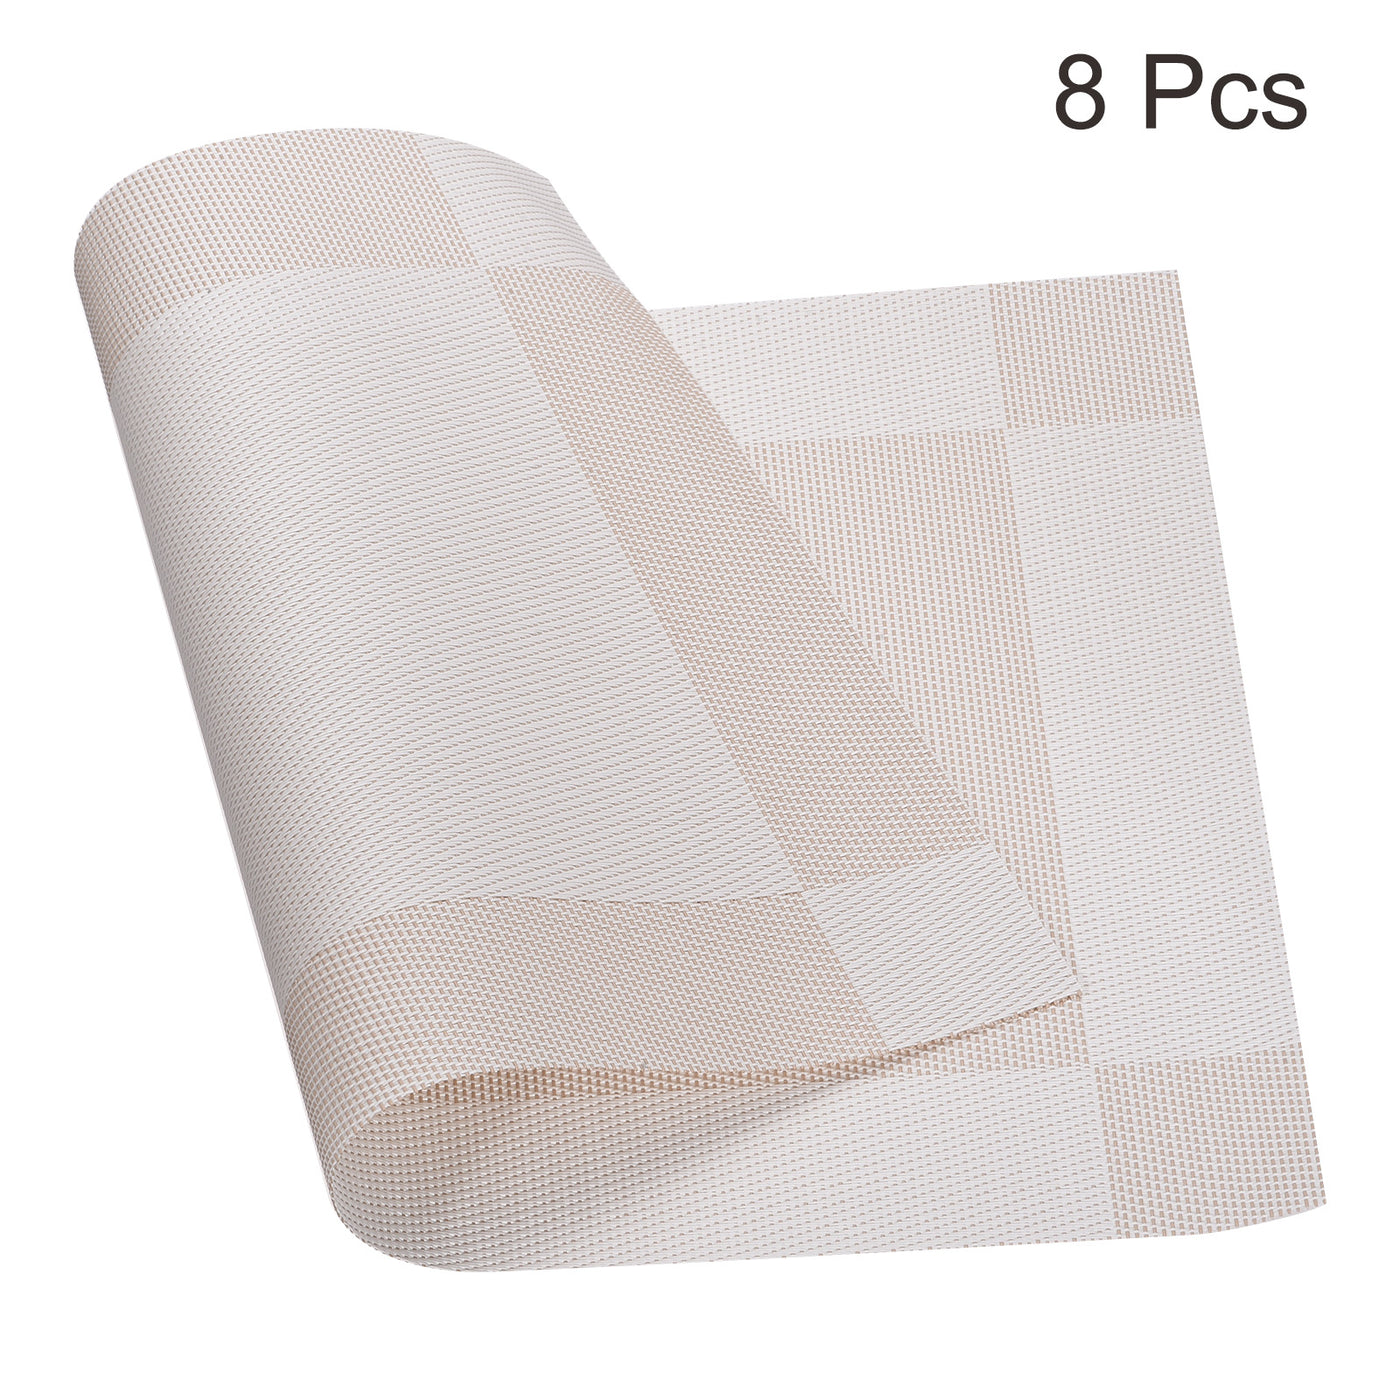 uxcell Uxcell Place Mats 450x300mm 8pcs PVC Table Washable Woven Placemat, Beige